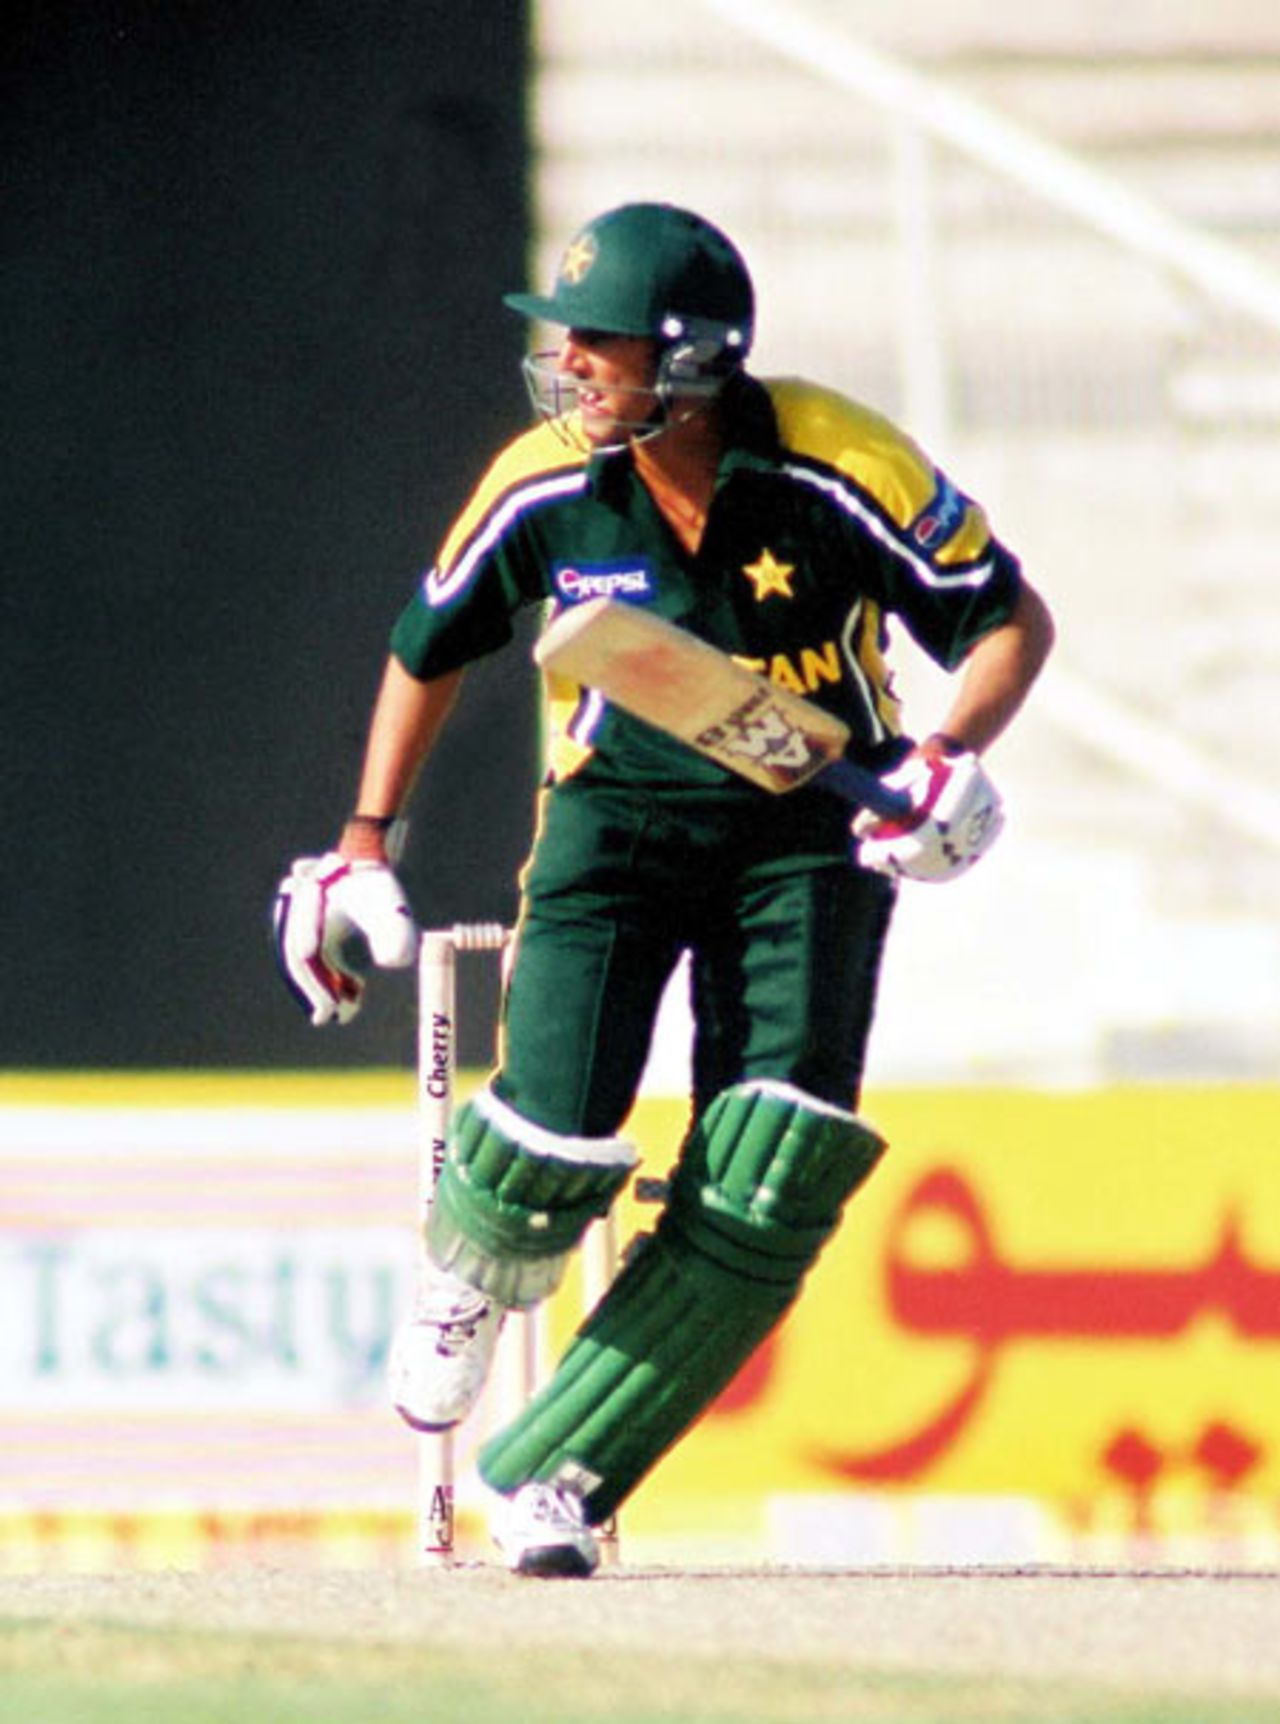 Younis Khan in action during his innings of 67, 1st Match: Pakistan v Zimbabwe, Cherry Blossom Sharjah Cup, 3 April 2003